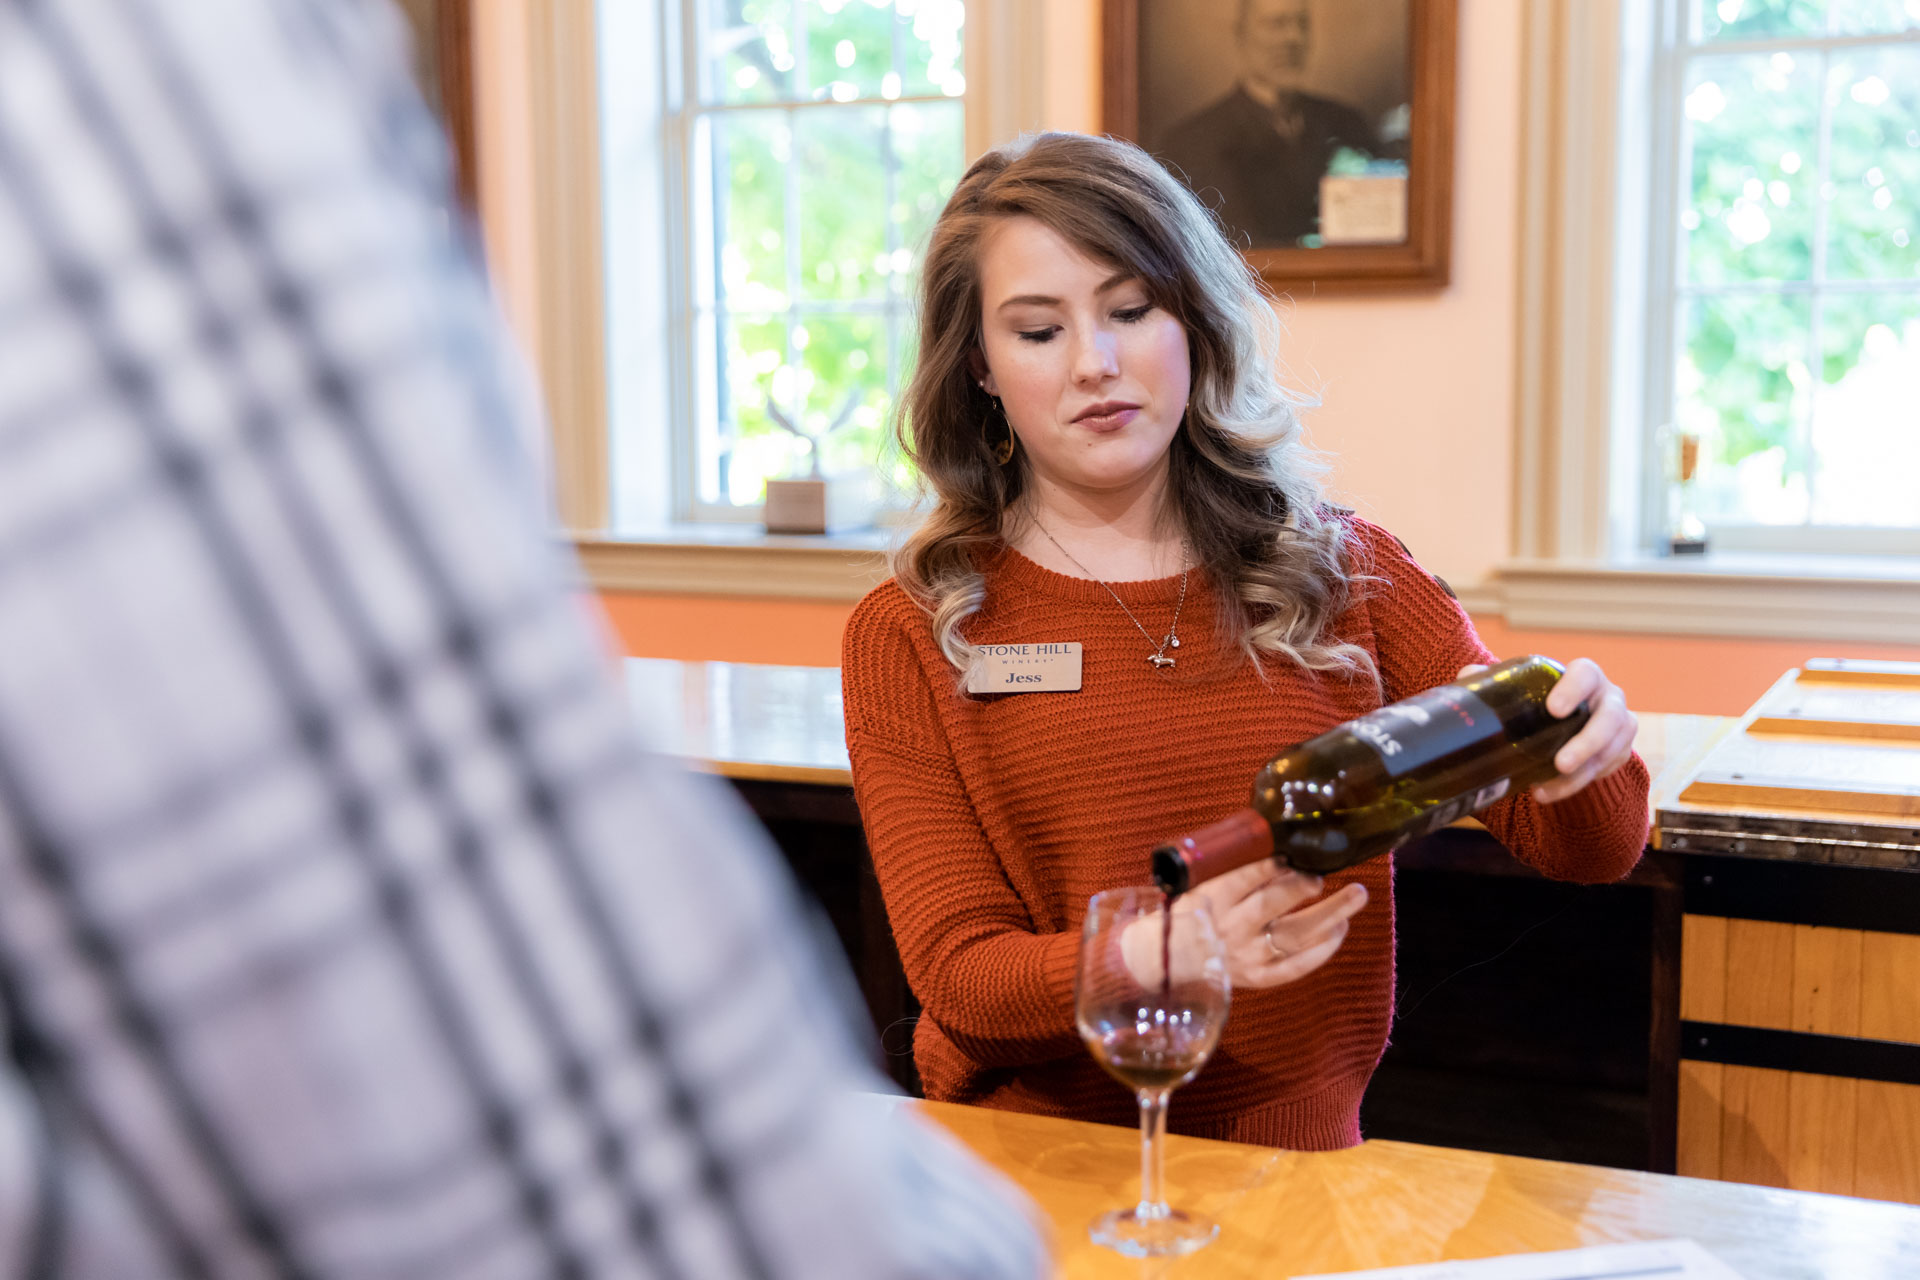 Pour Ozark Hellbender in the stone hill winery tasting room